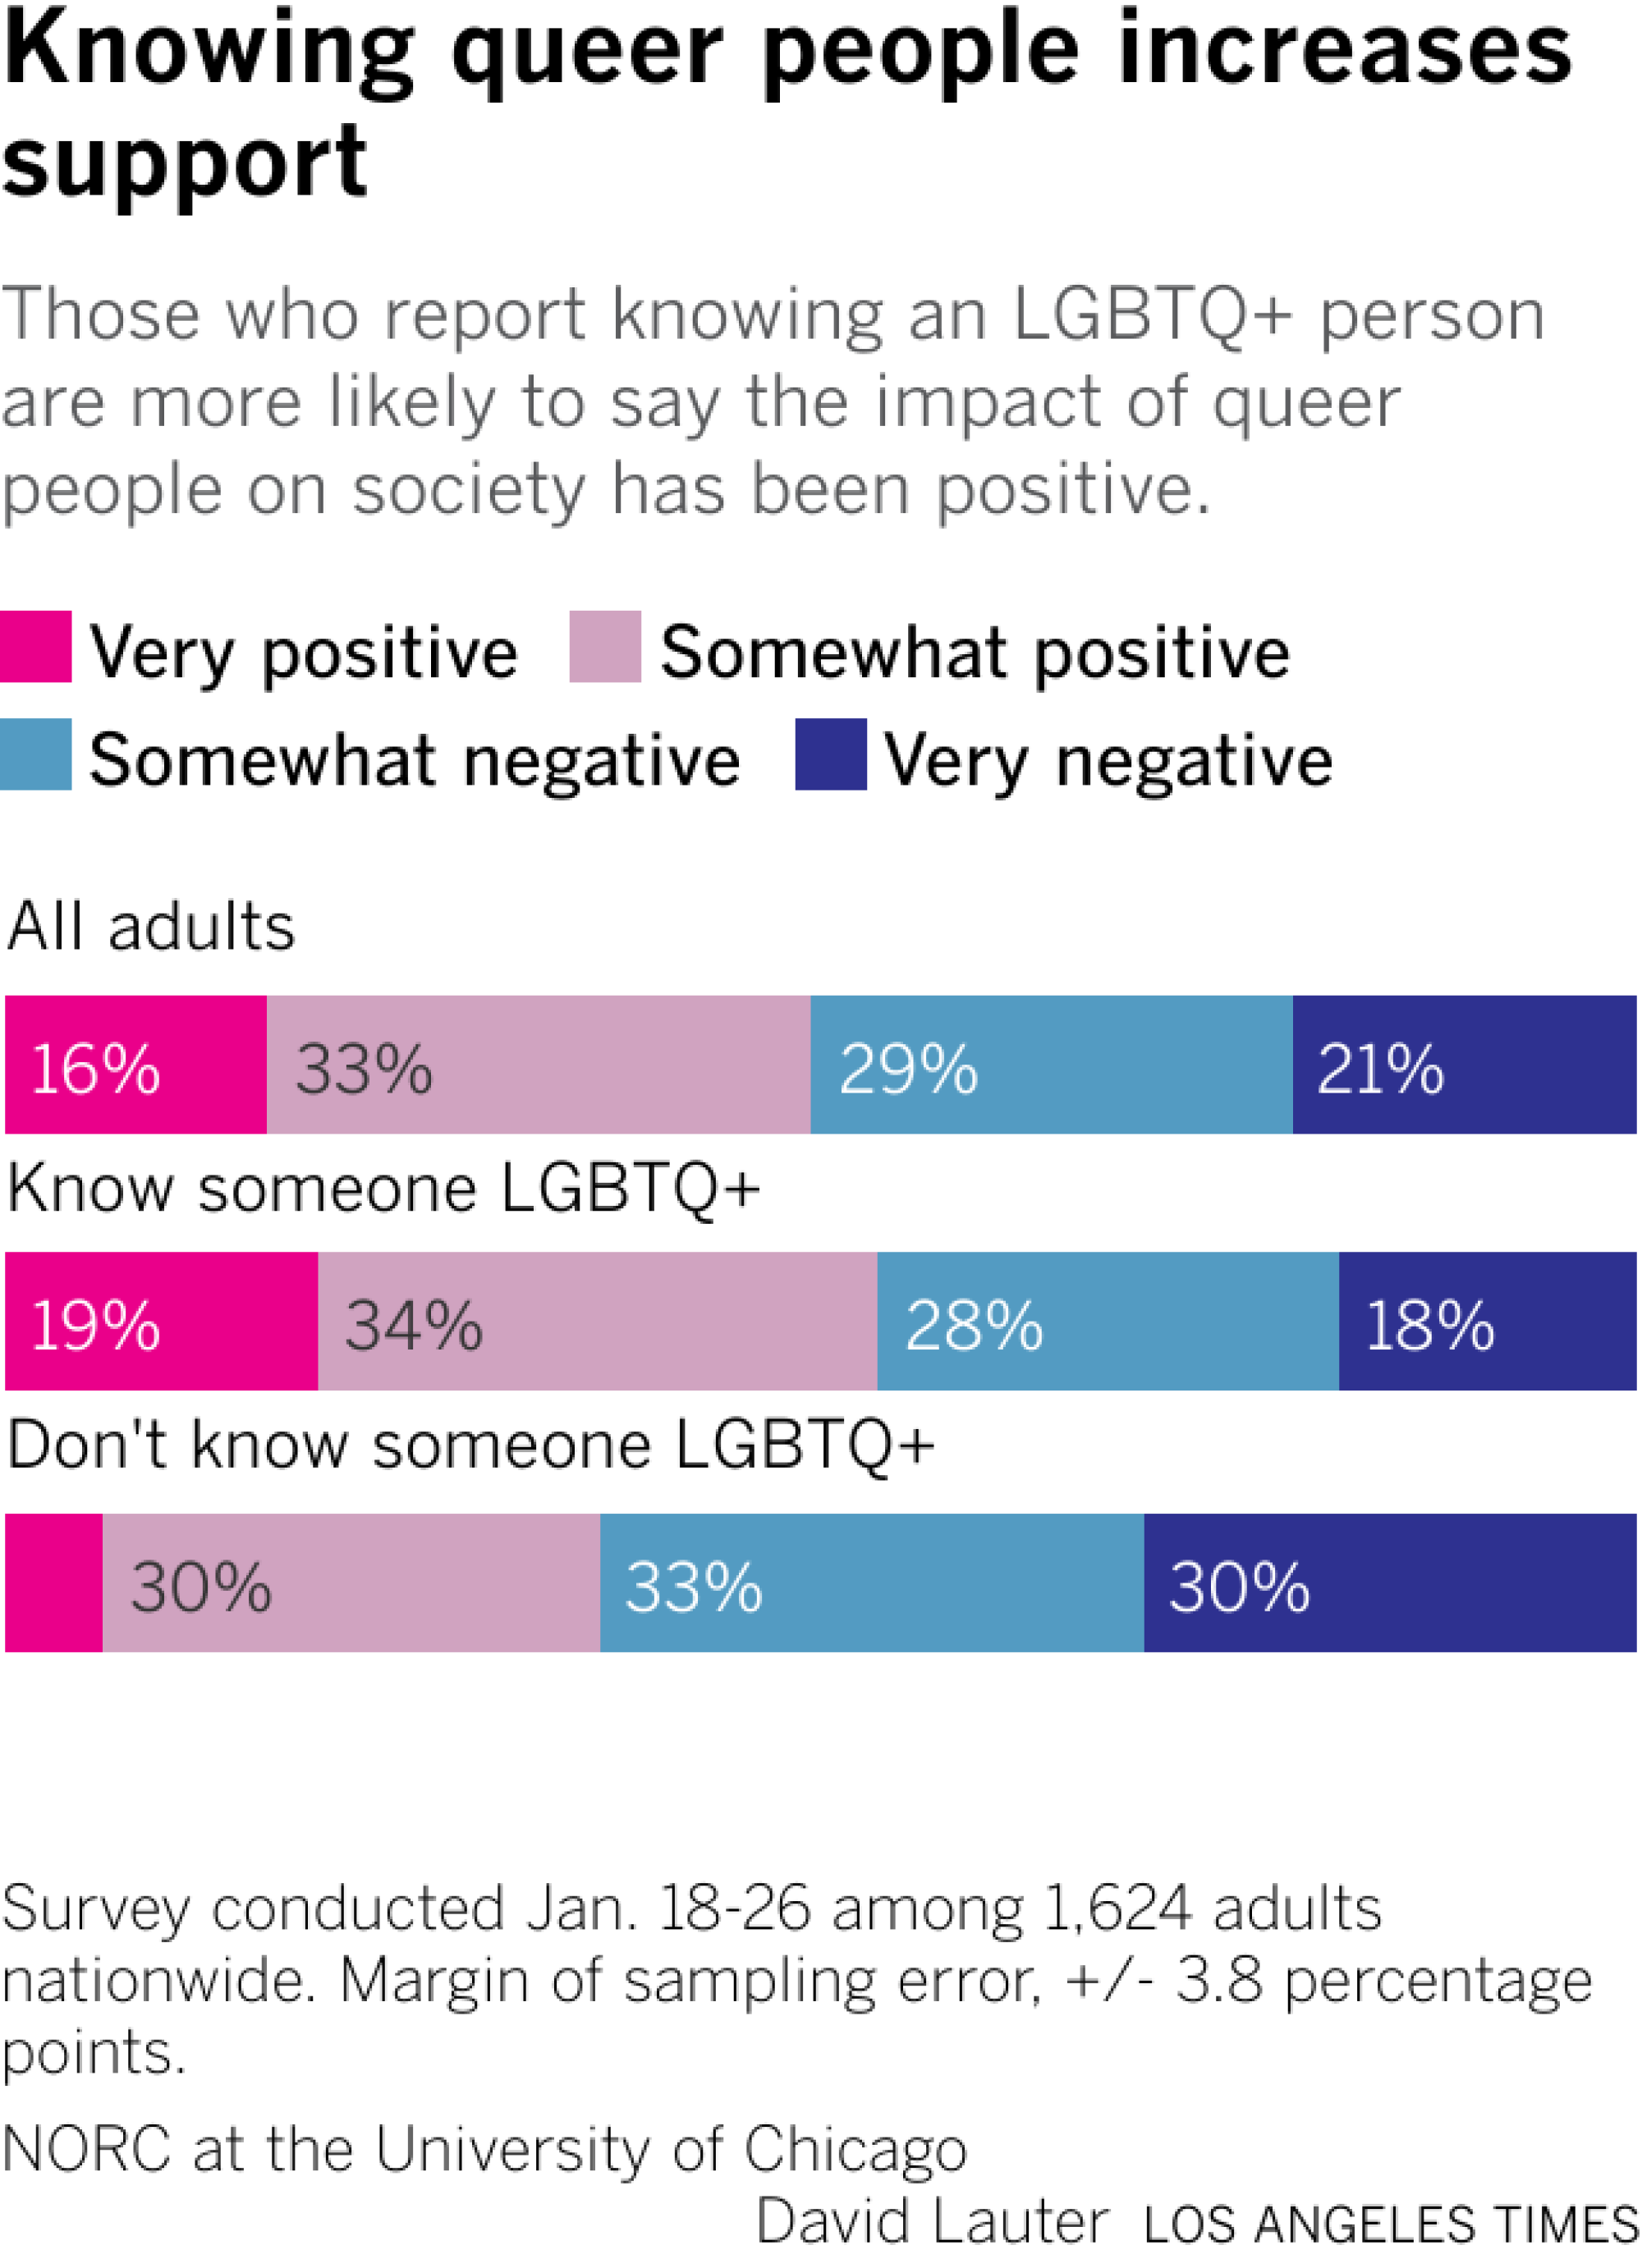 Bar chart shows the share of American adults and those who who do or do not know someone who identifies as LGBTQ+ and their views on whether the impact of LGBTQ+ on people has been positive or negative.